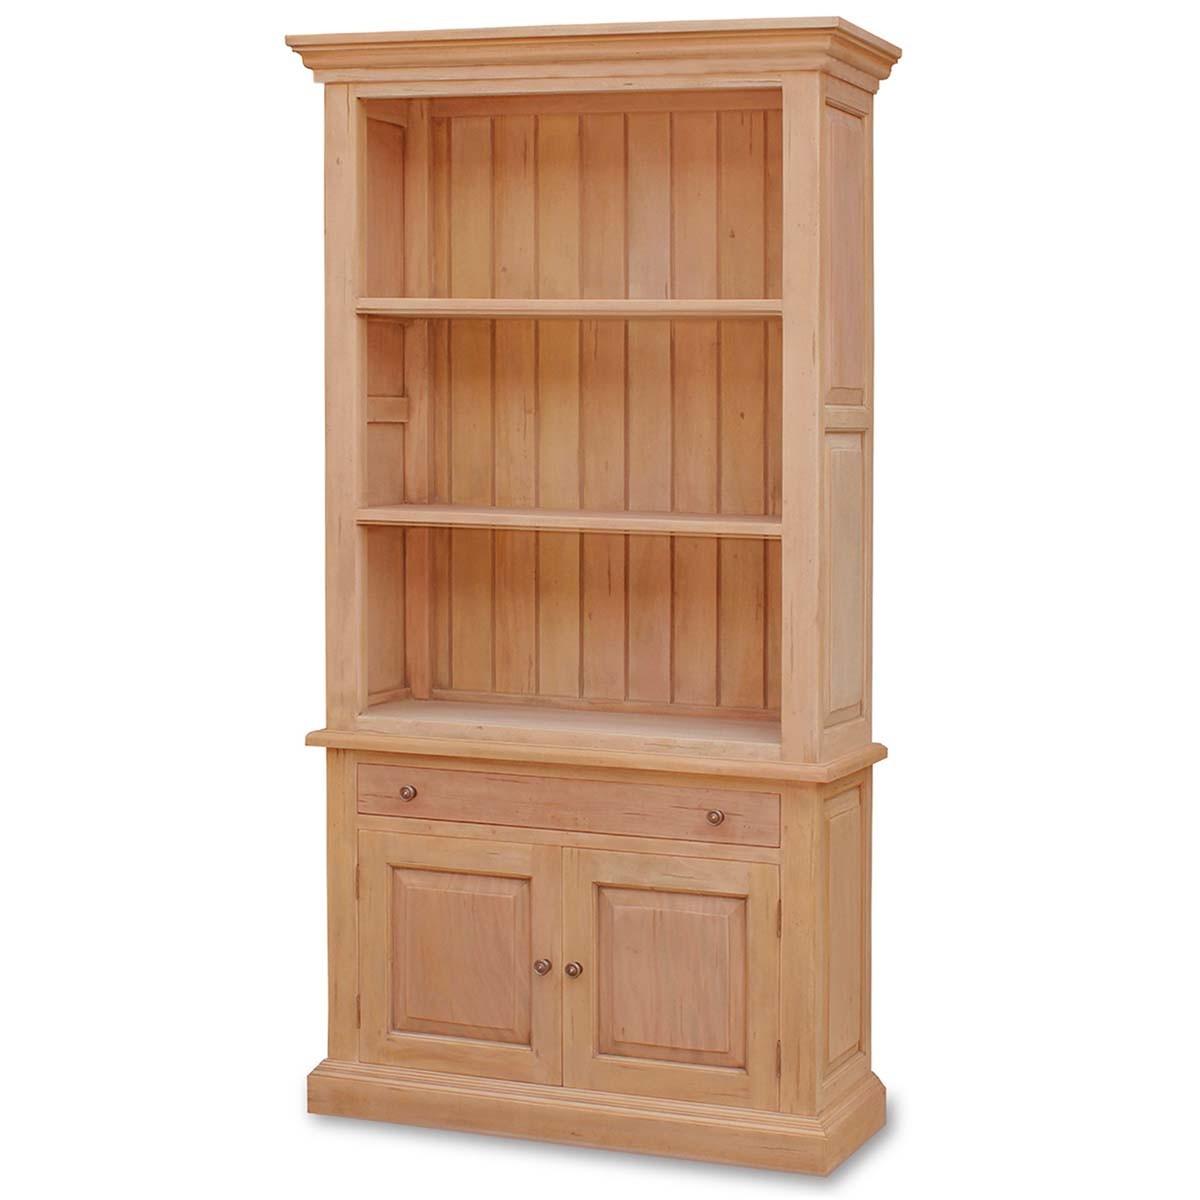 

    
Home Office DRIFTWOOD Edwardian Bookcase Solid Wood Bramble 25642 Sp Order
